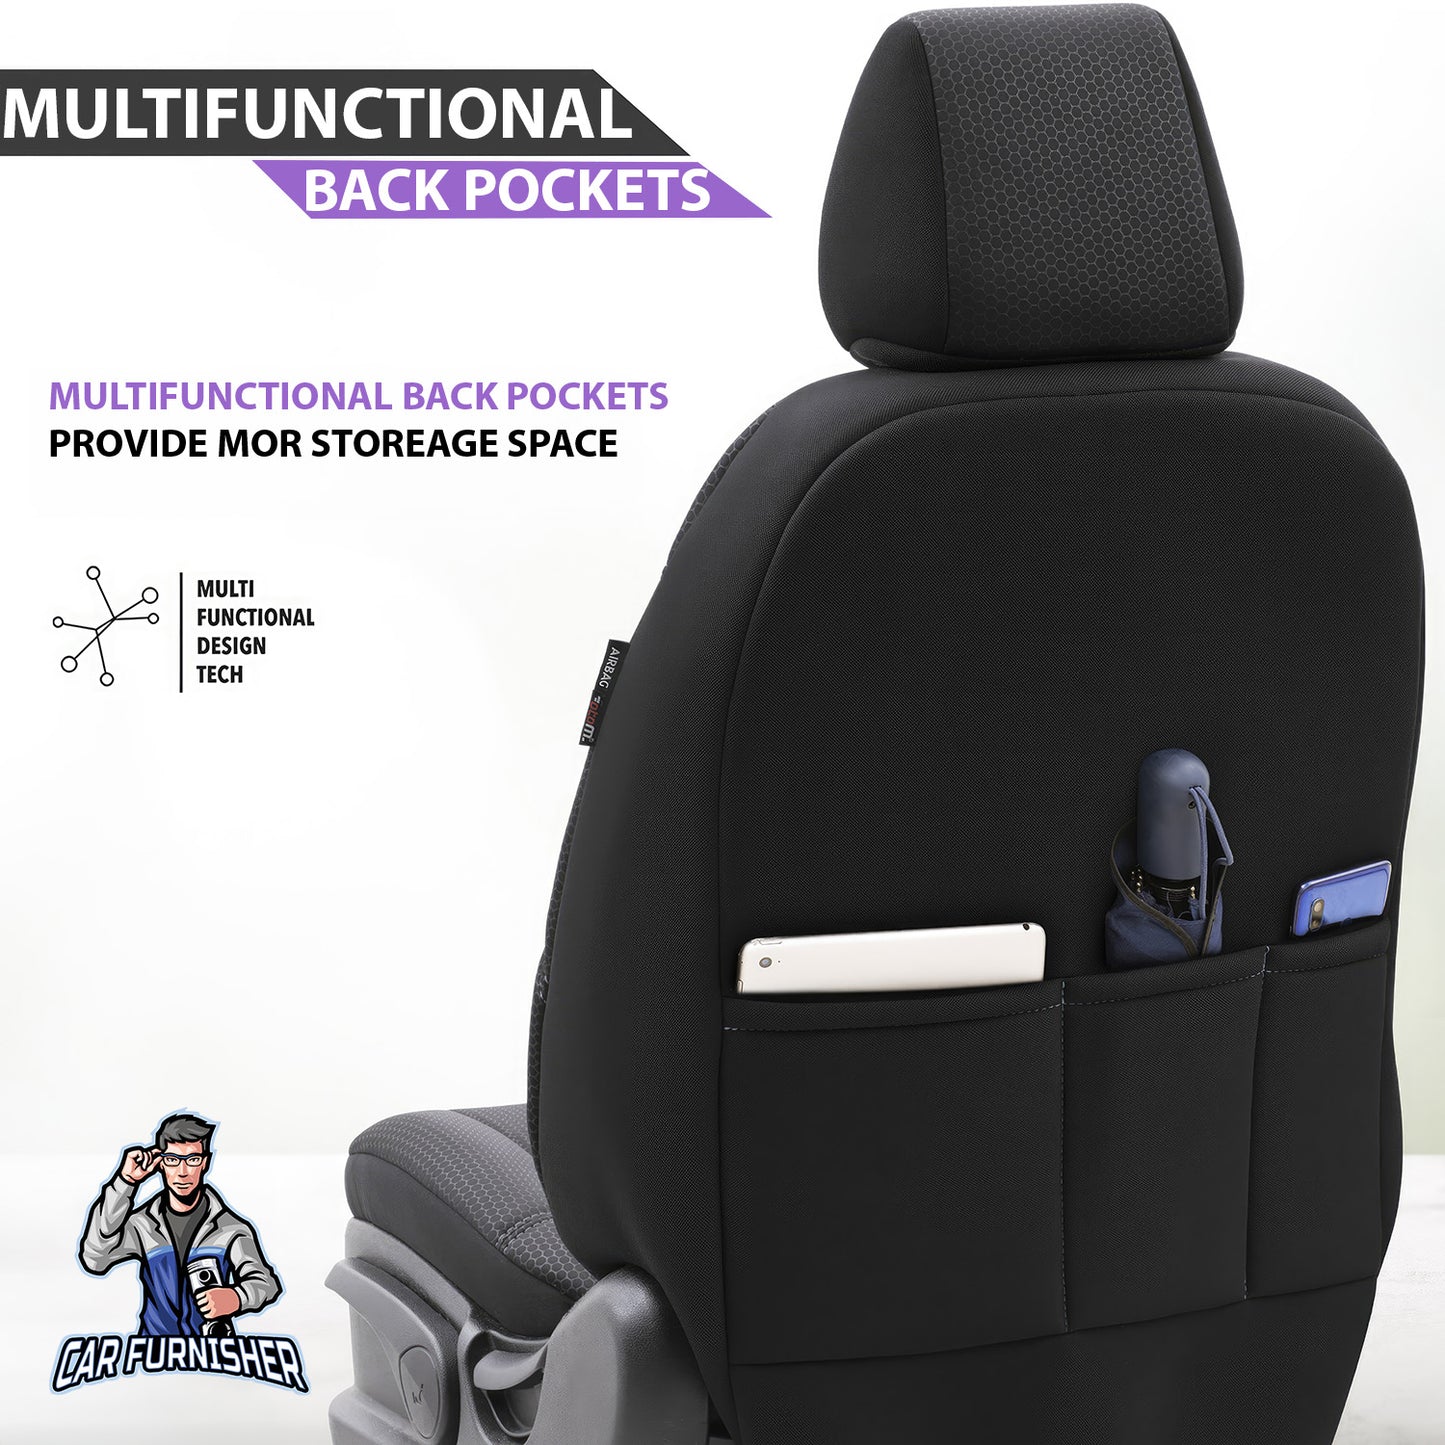 Car Seat Cover Set - Iron Design Gray 5 Seats + Headrests (Full Set) Leather & Cotton Fabric